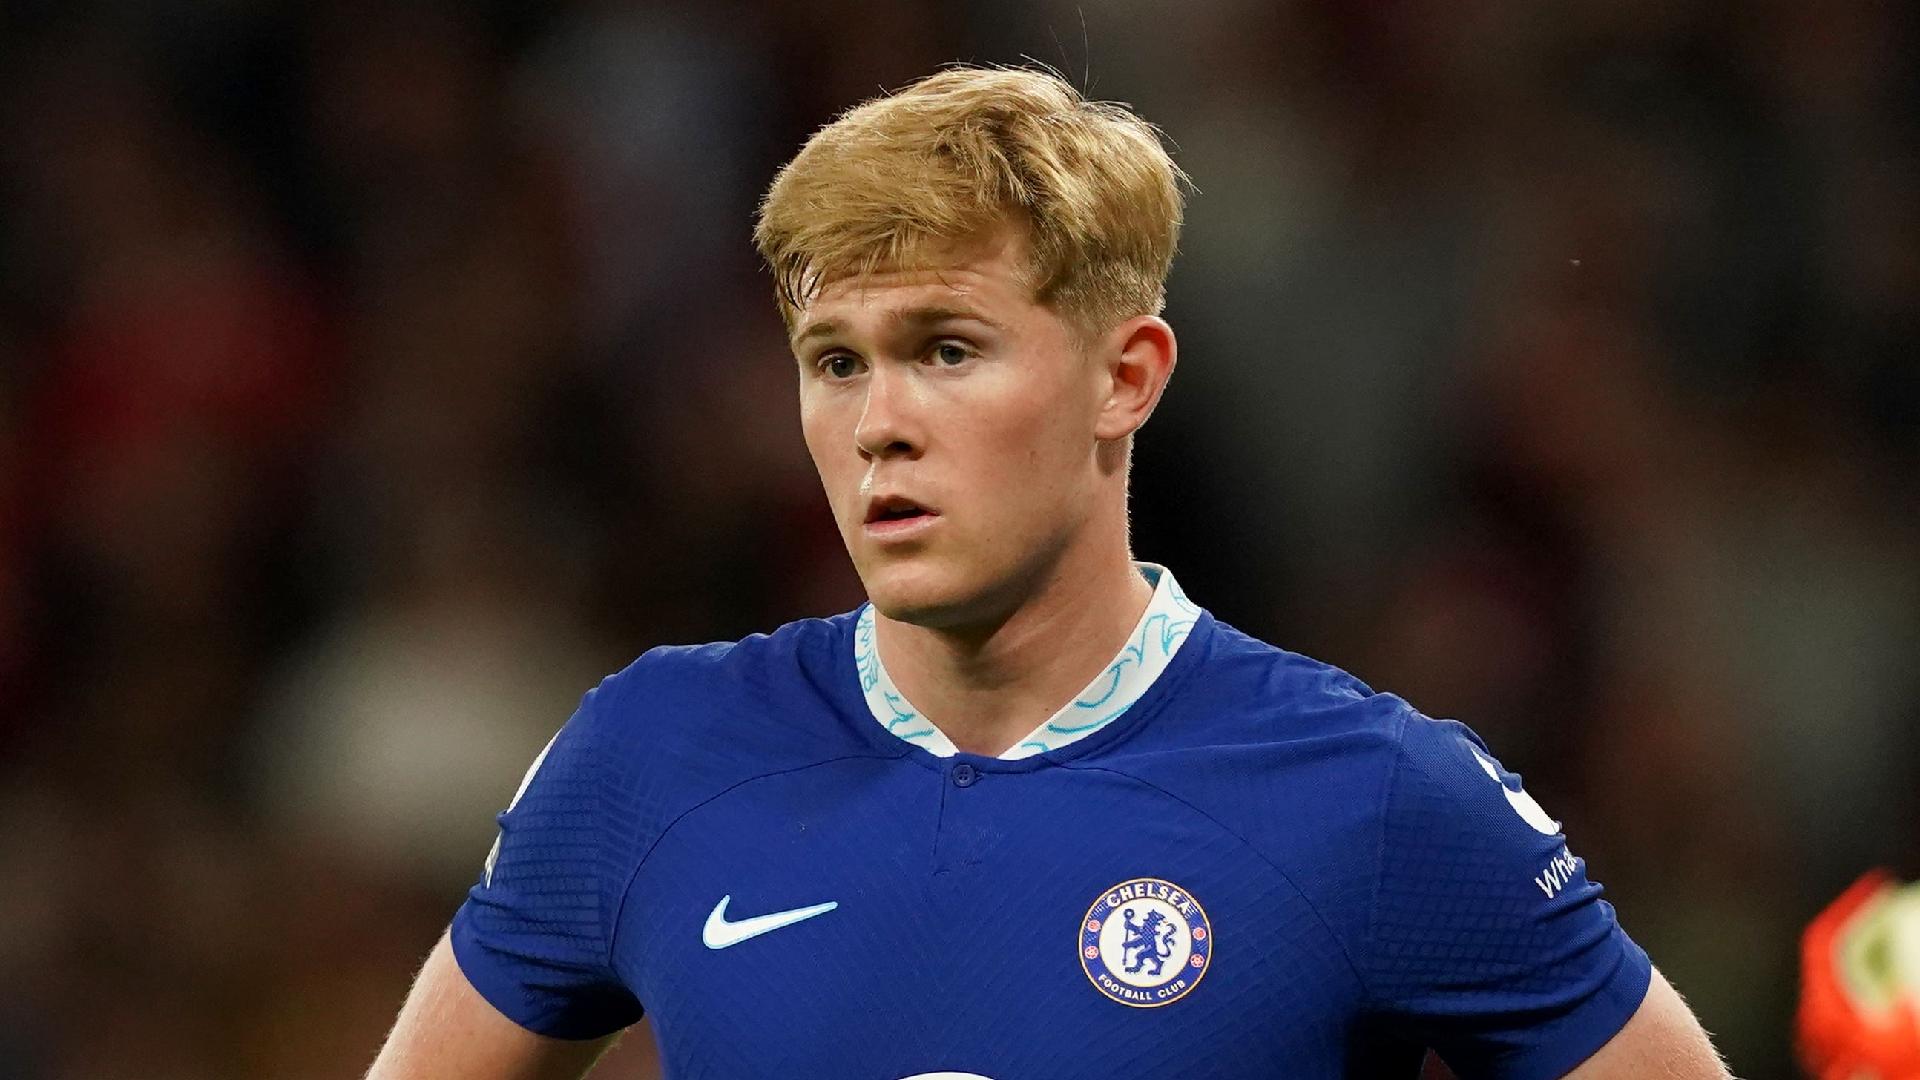 Promising defender Lewis Hall joins Newcastle on season-long loan from Chelsea